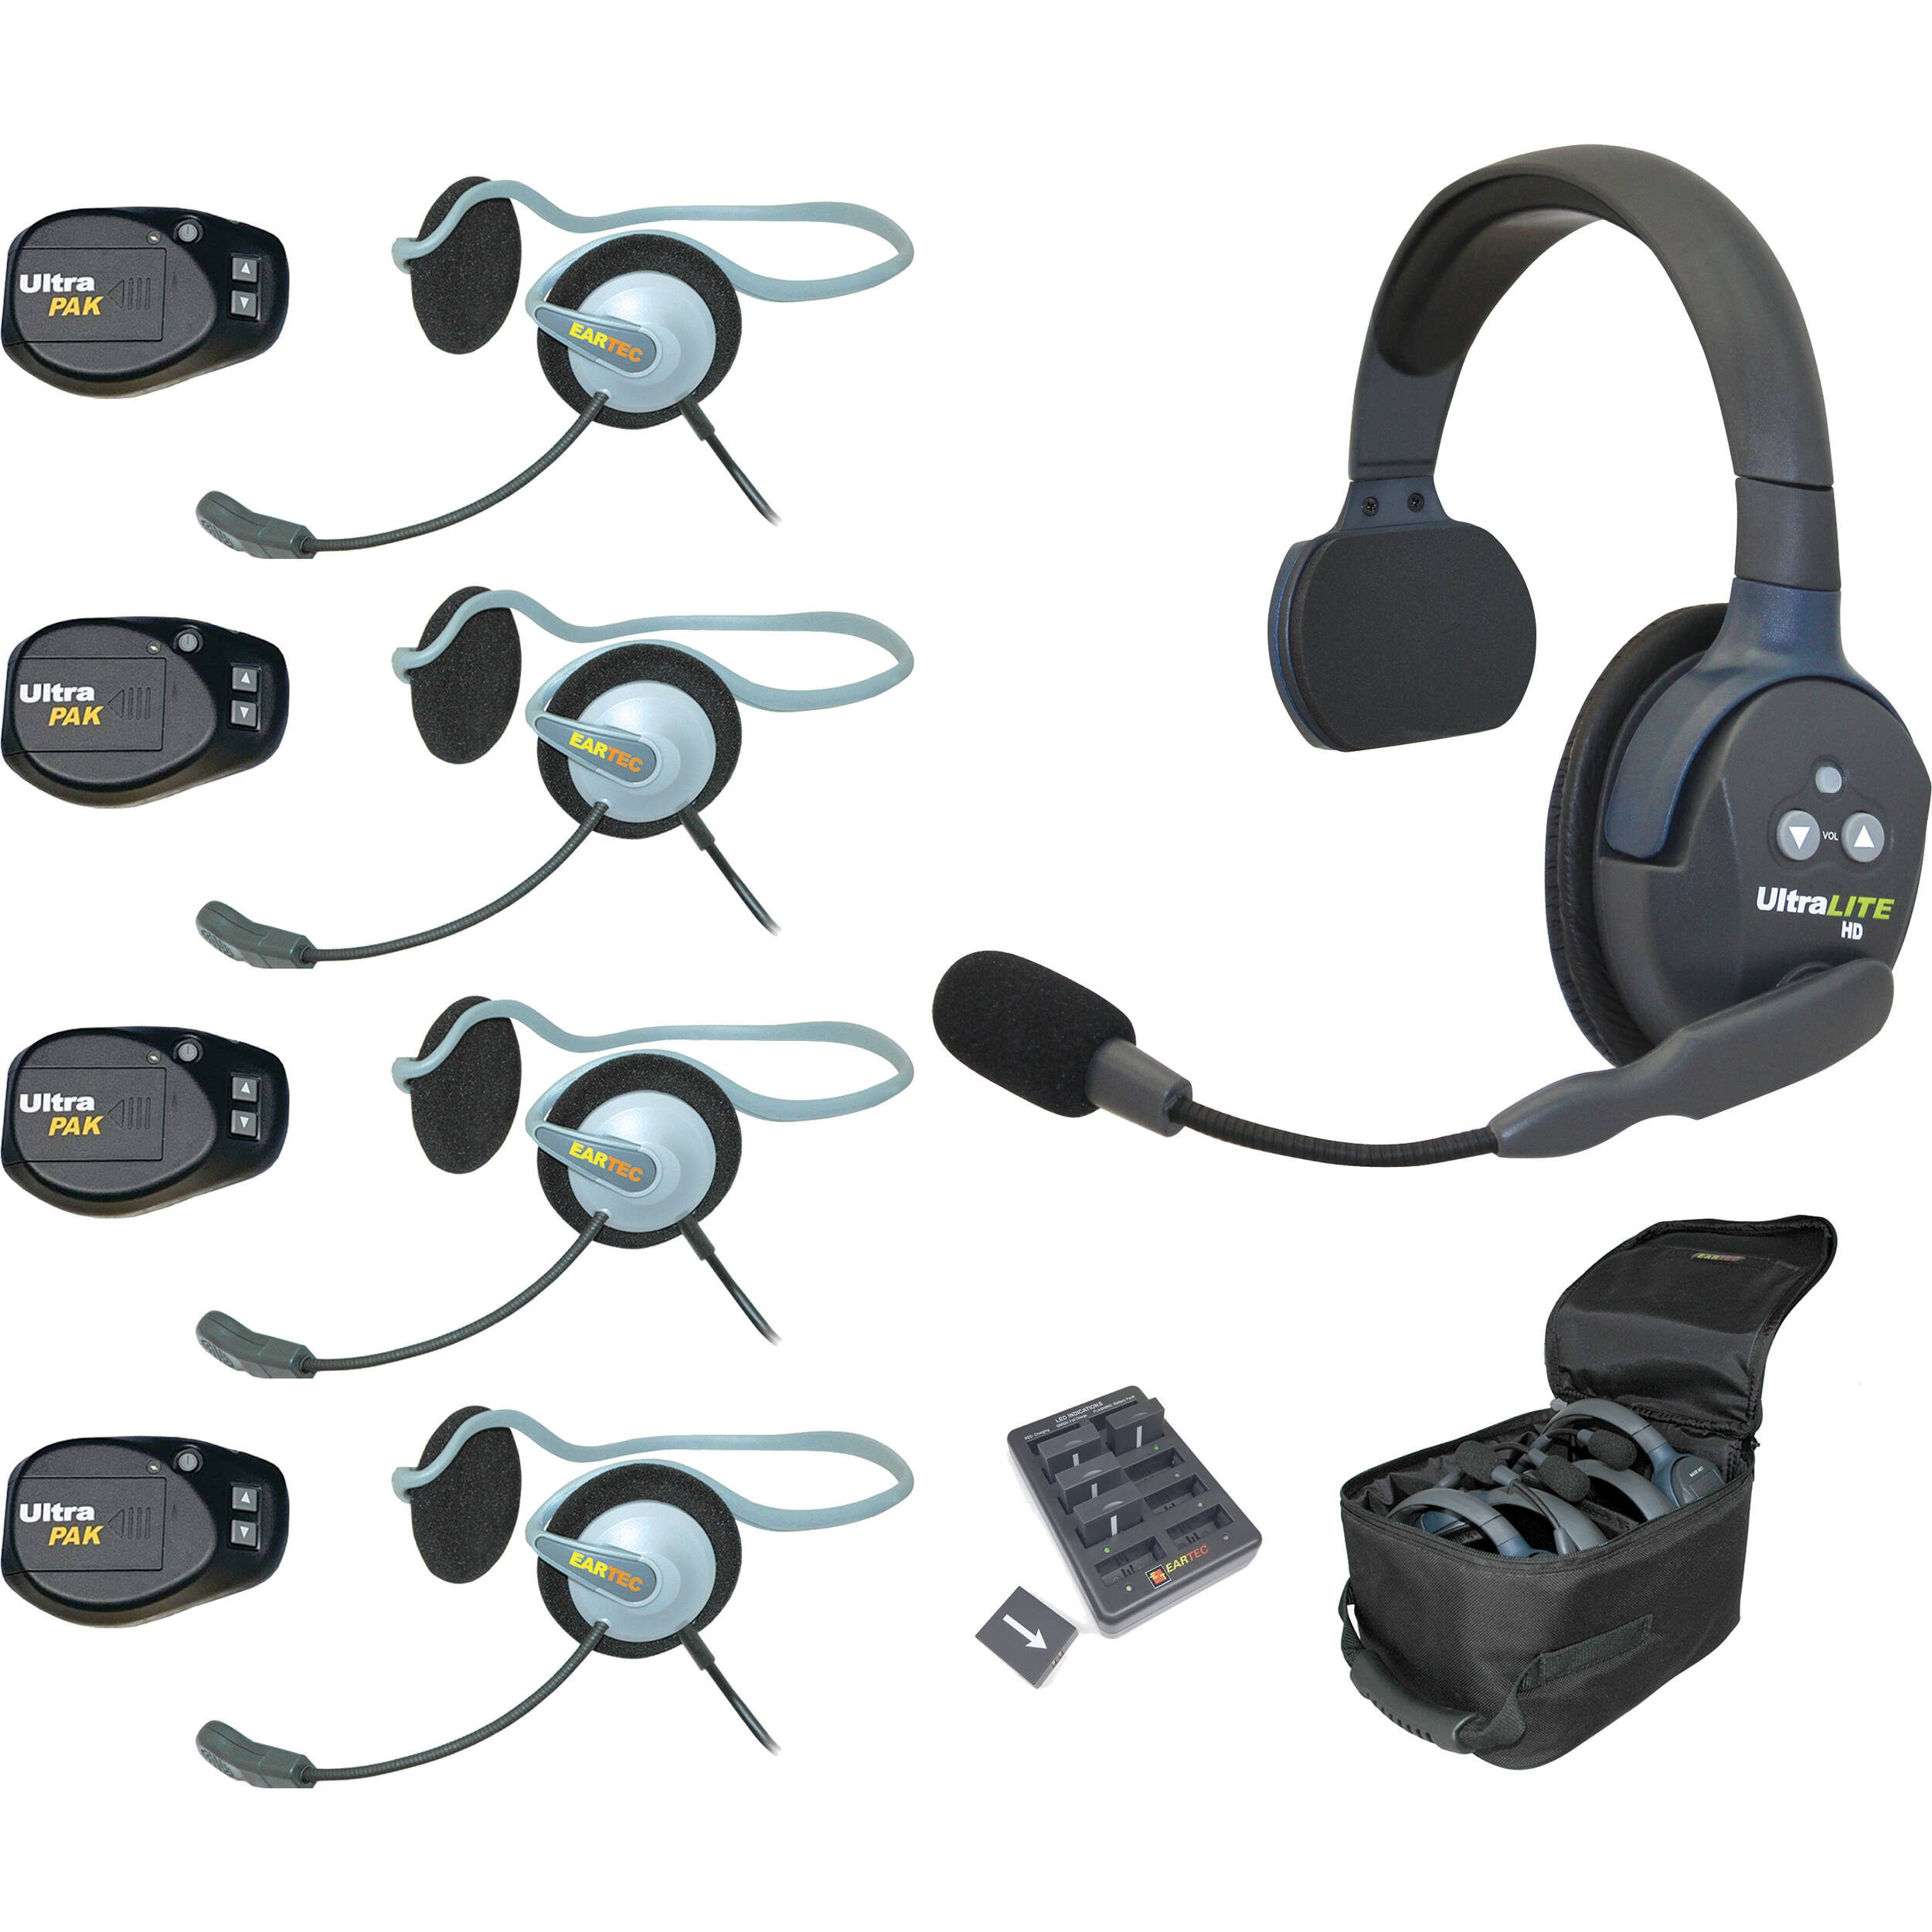 Eartec UltraLITE Single Full-Duplex Wireless Intercom System with 4 UltraPAK and 4 Monarch Headsets